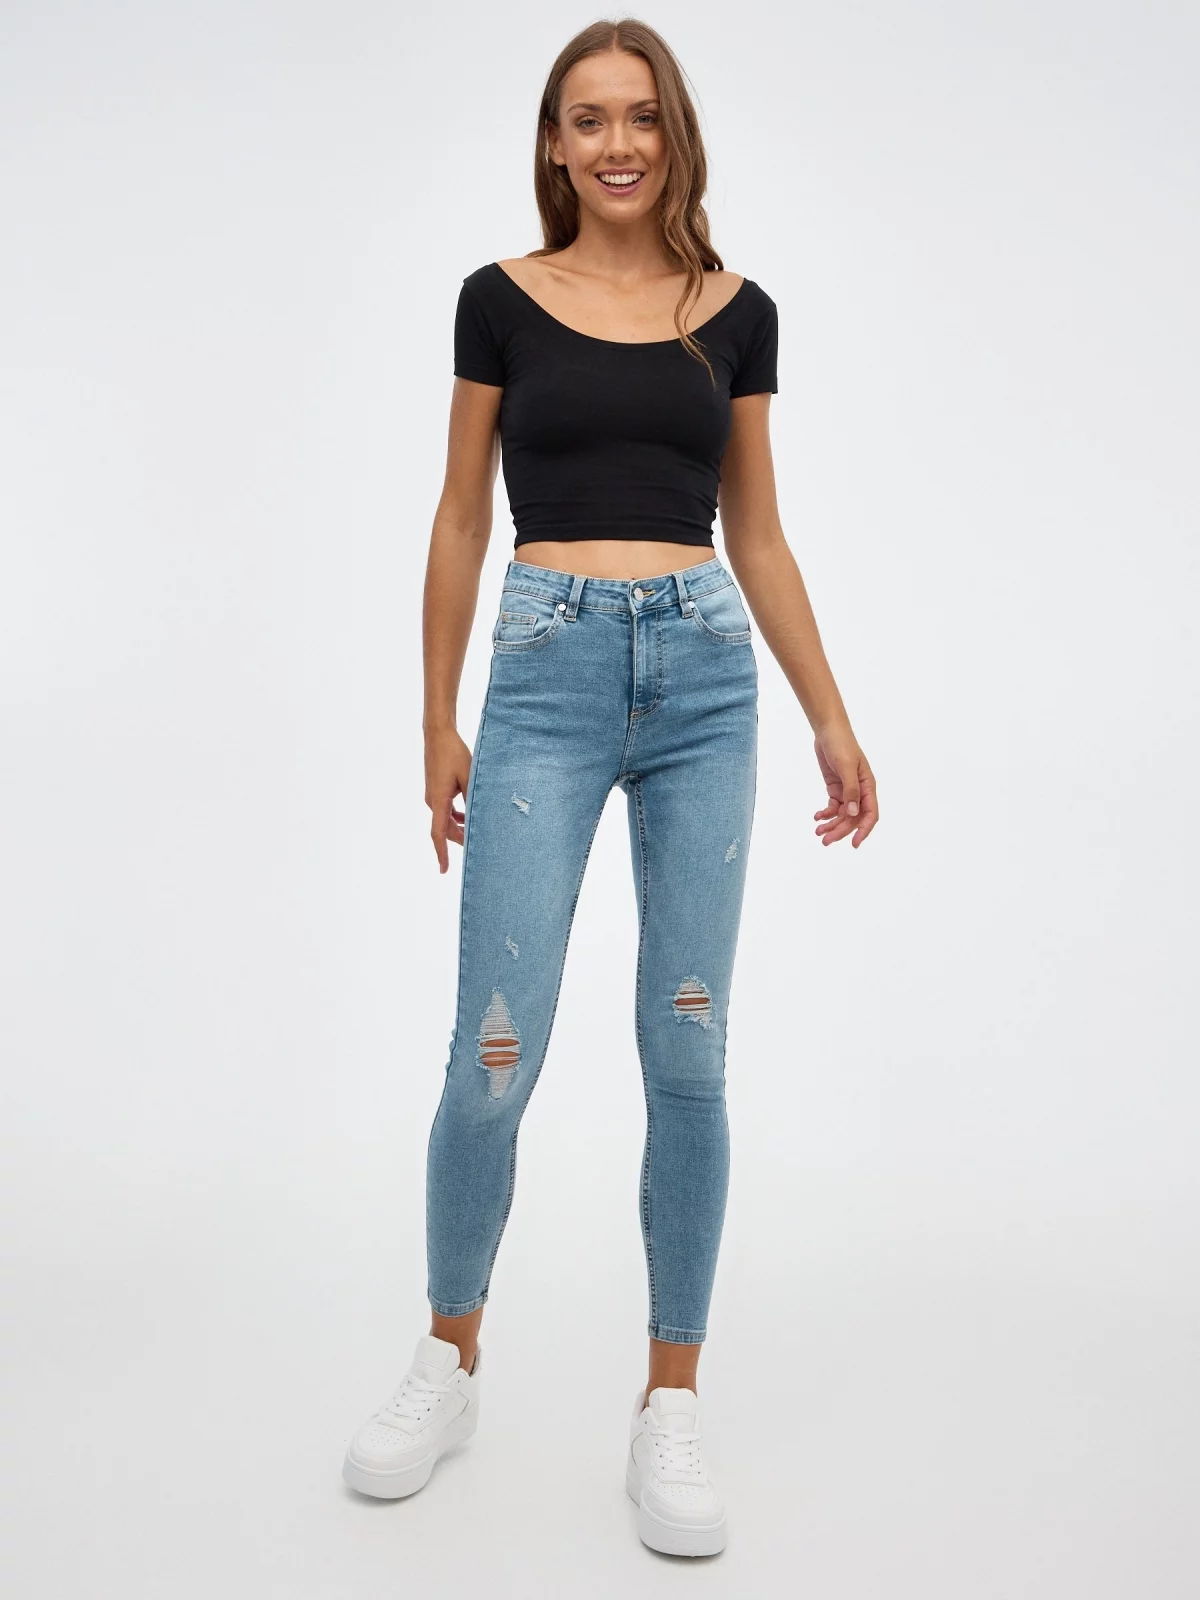 Jeans mid rise skinny push up azul claro vista geral frontal